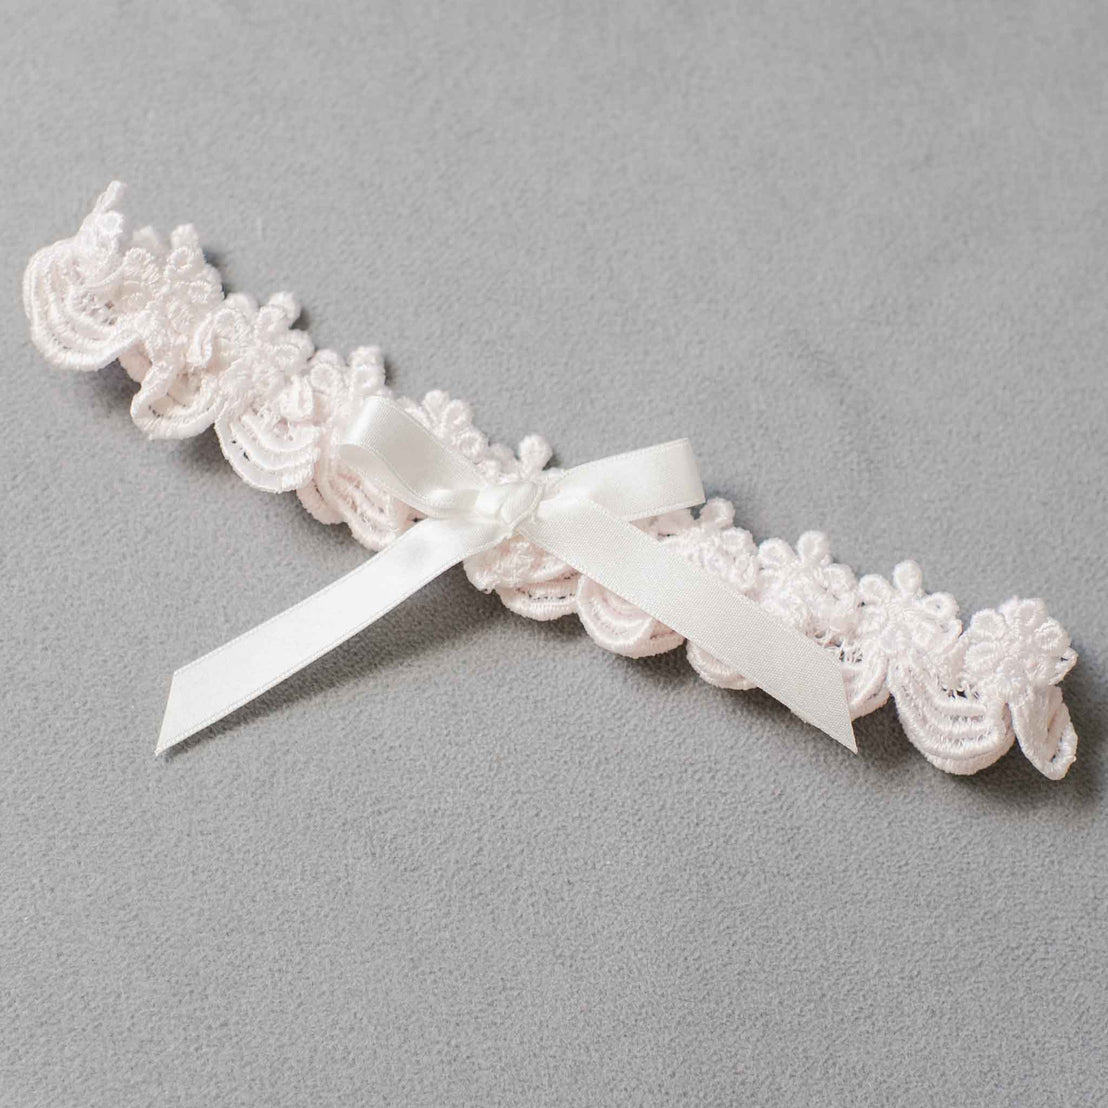 An elegant, upscale Joli  Headband with a silky ribbon bow in the center, displayed on a light gray background.